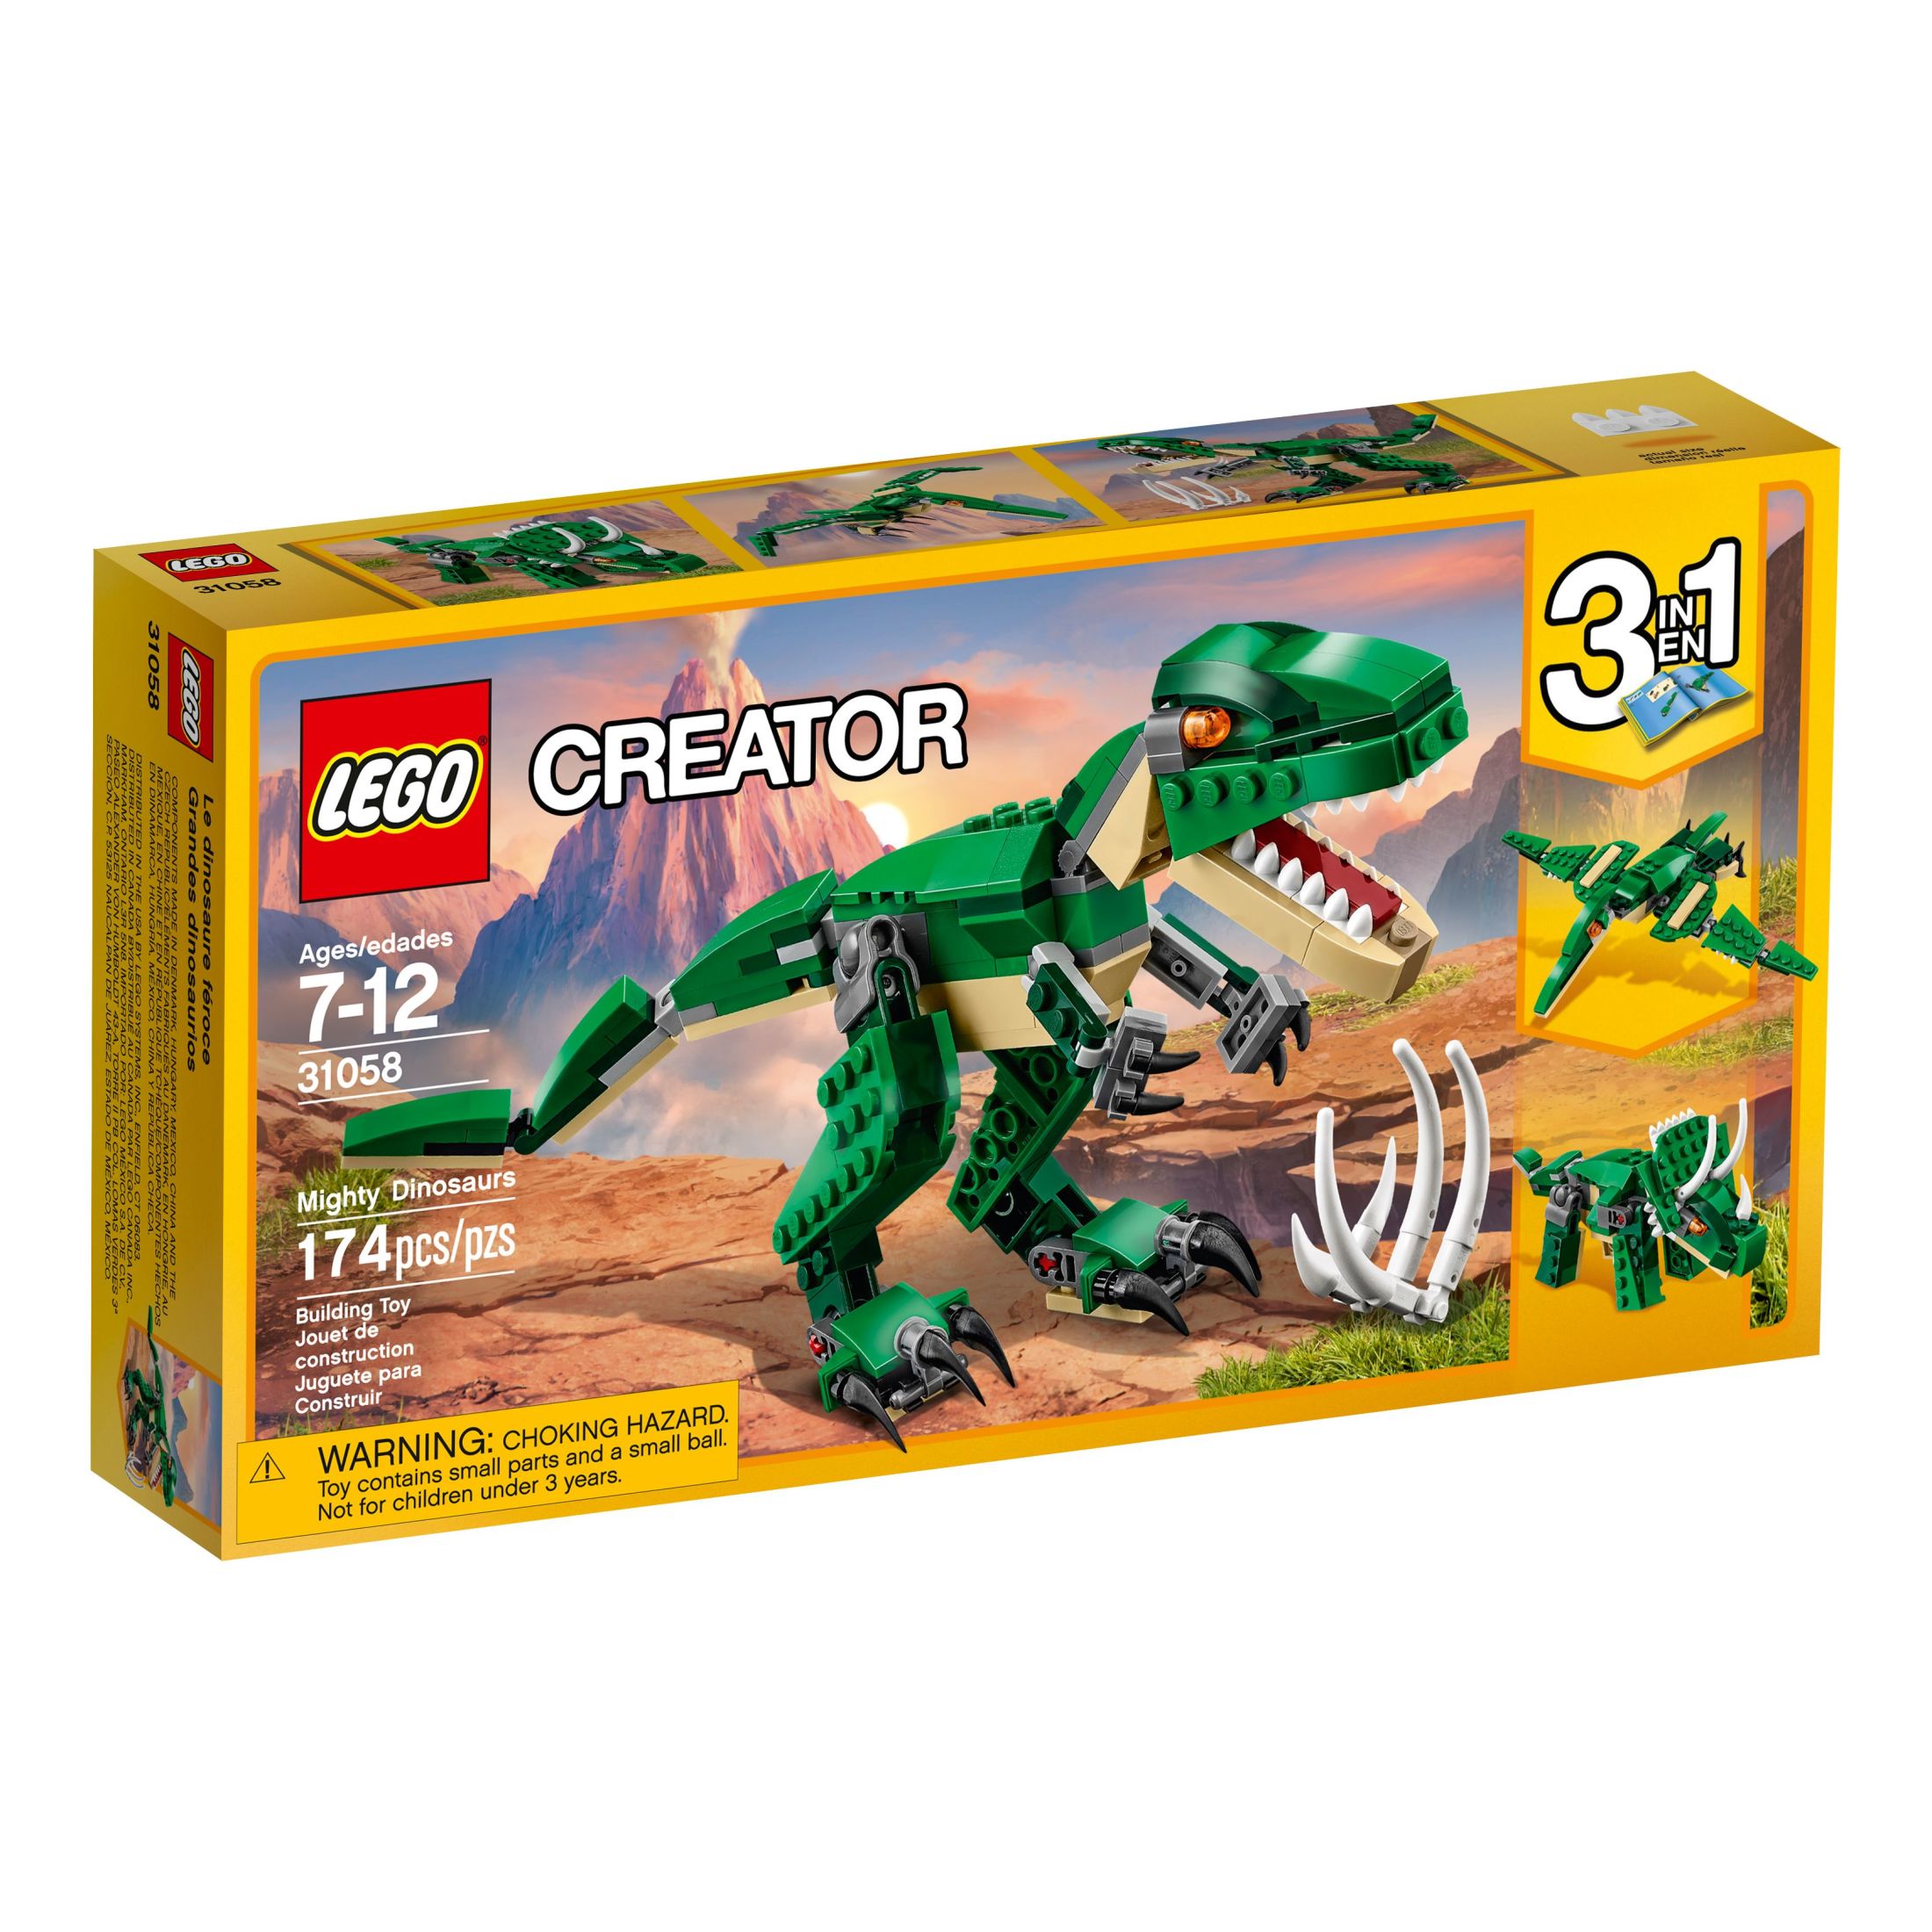 LEGO Creator 3 in 1 Mighty Dinosaur Toy, Transforms from T. rex to Triceratops to Pterodactyl Dinosaur Figures, Great Gift for 7 - 12 Year Old Boys & Girls, 31058 - image 2 of 6